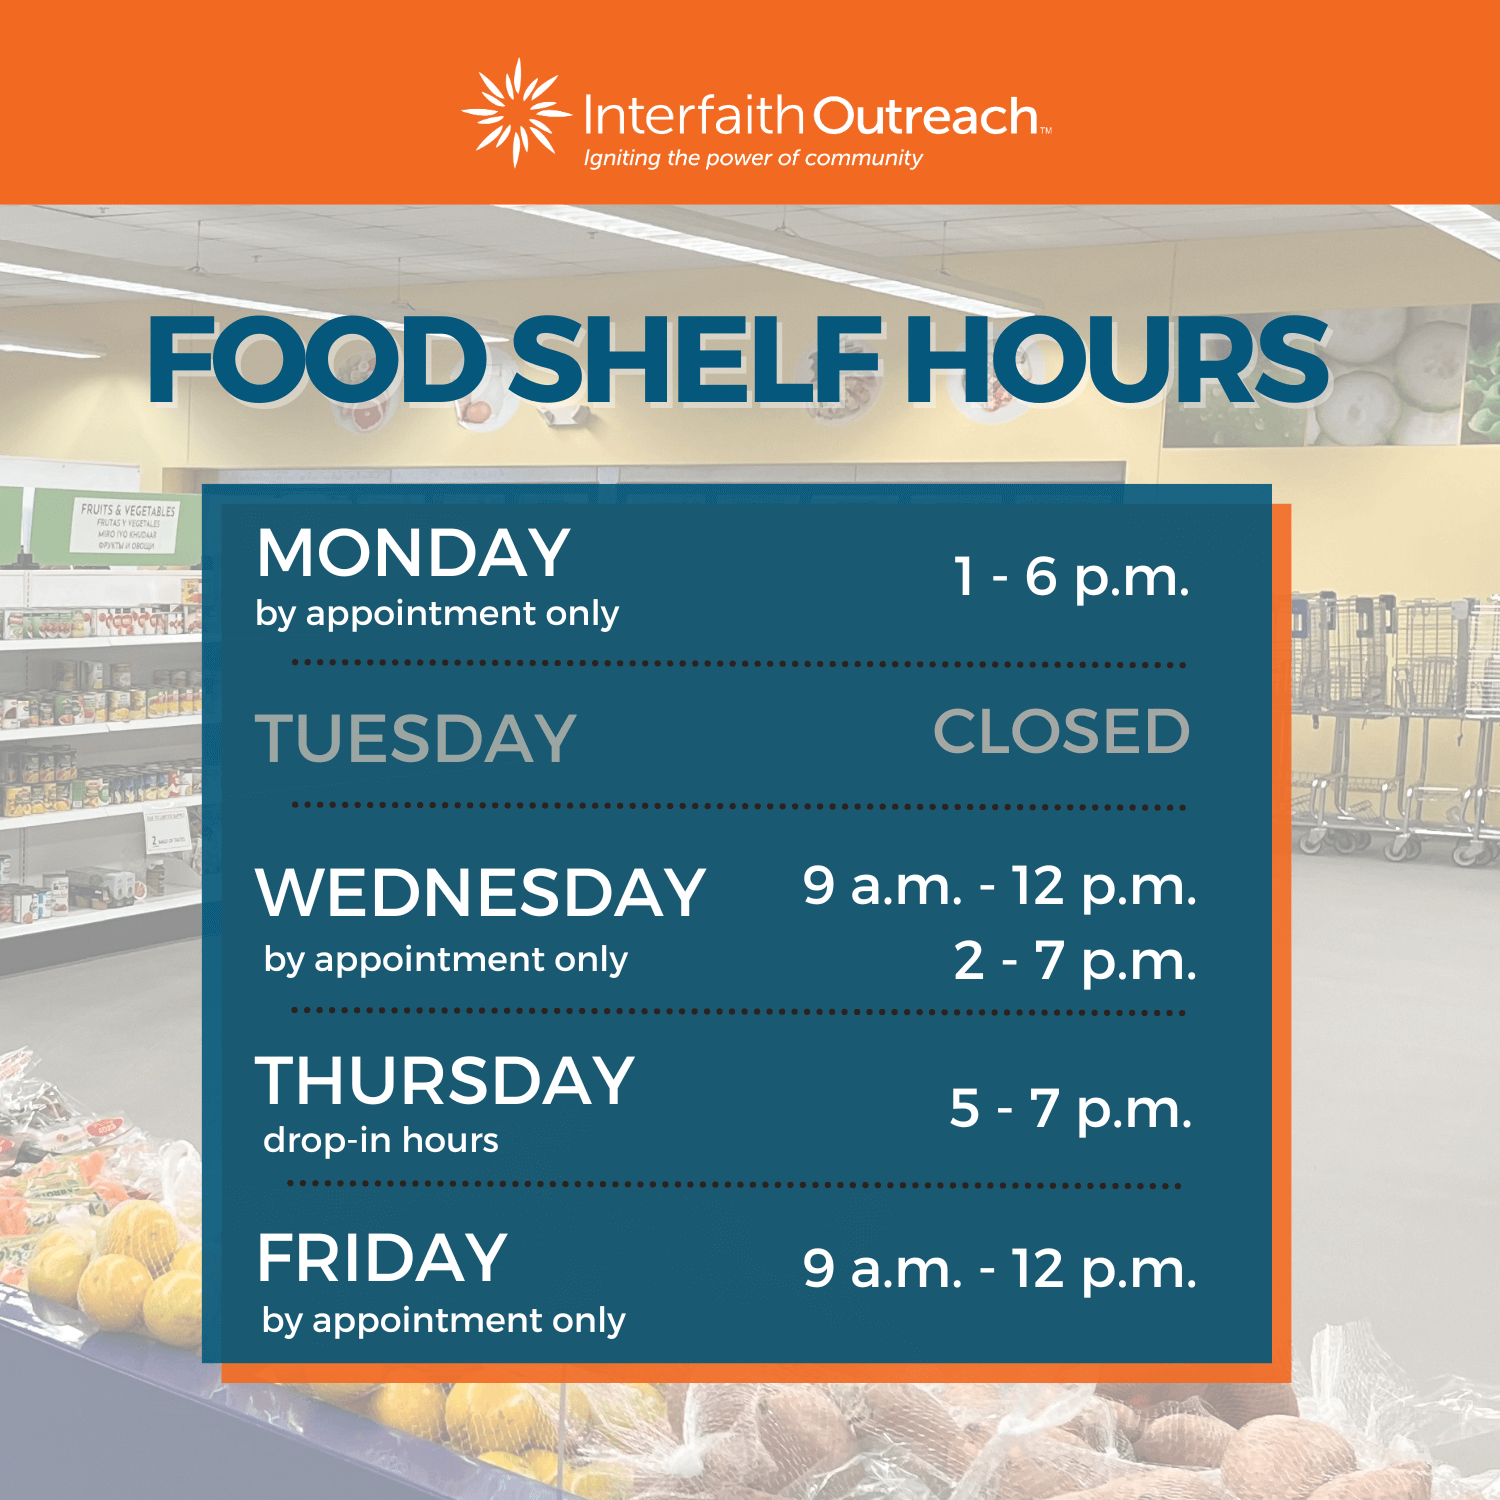 IOCP Food Shelf Hours include by appointment and drop-in times.